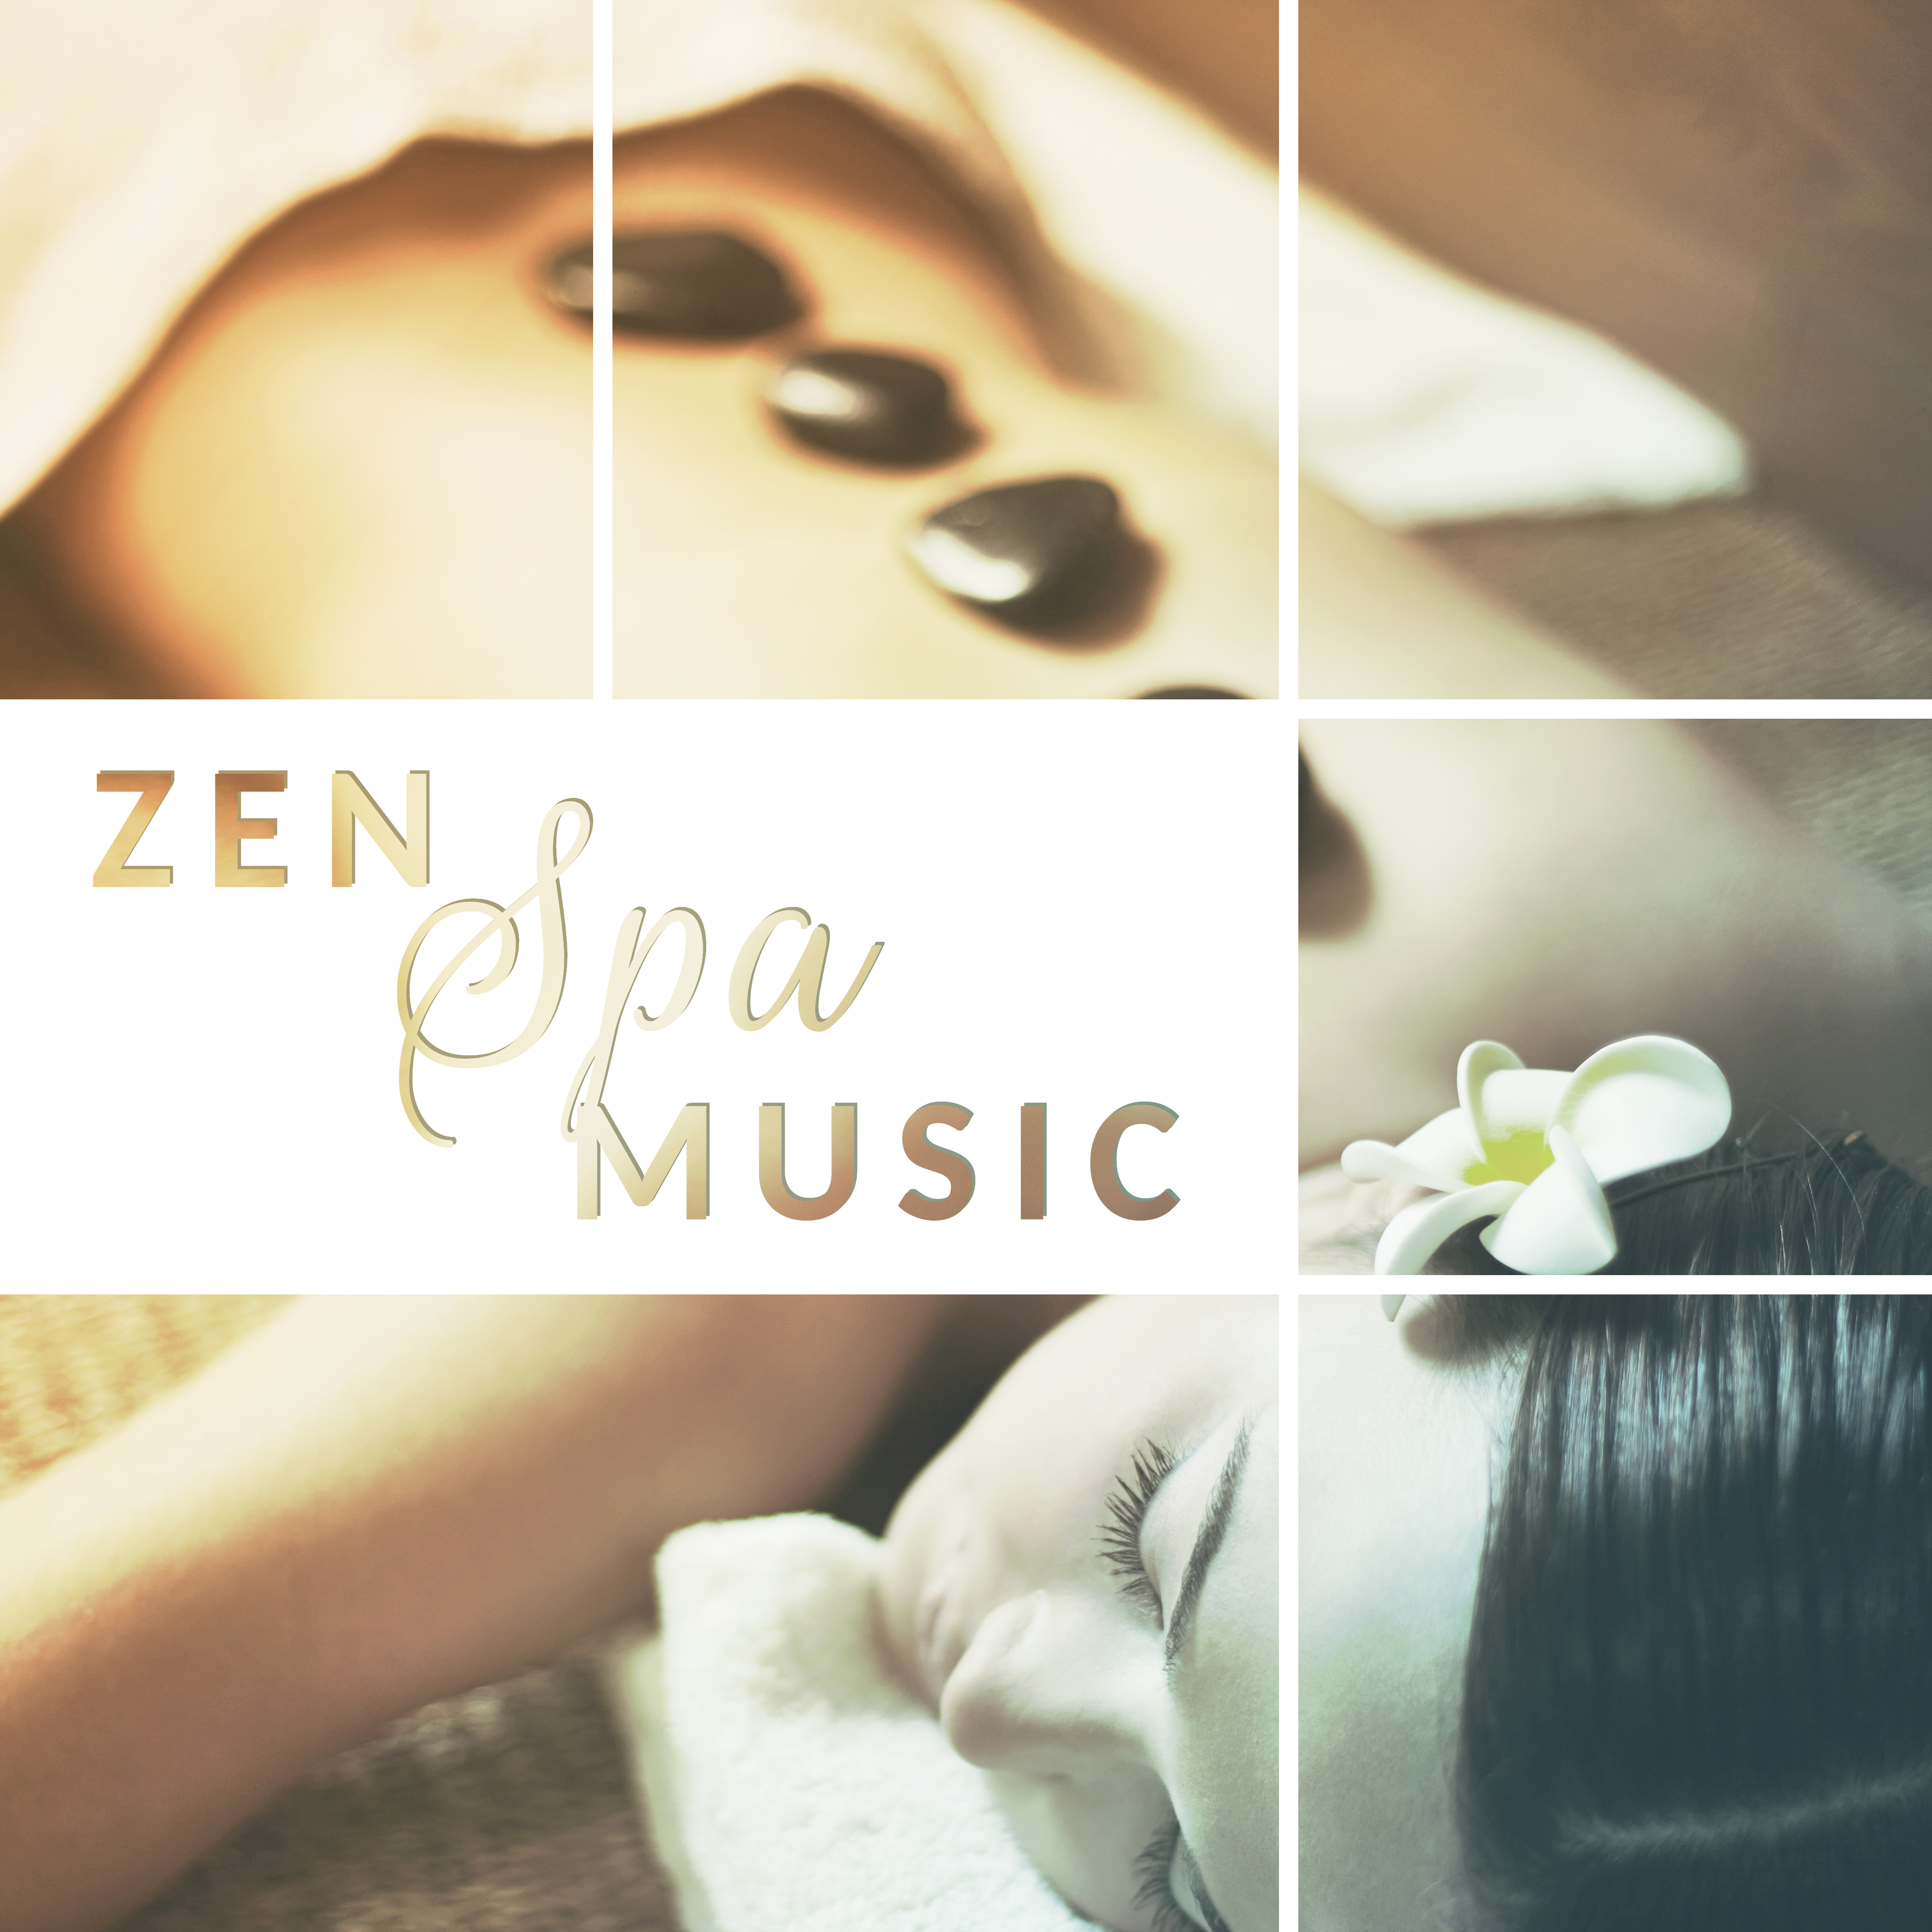 Zen SPA Music  Peaceful Nature Music for Spa  Wellness, Relaxation Music, Sounds of the Birds And Ocean Waves, Full Relaxing New Age Music